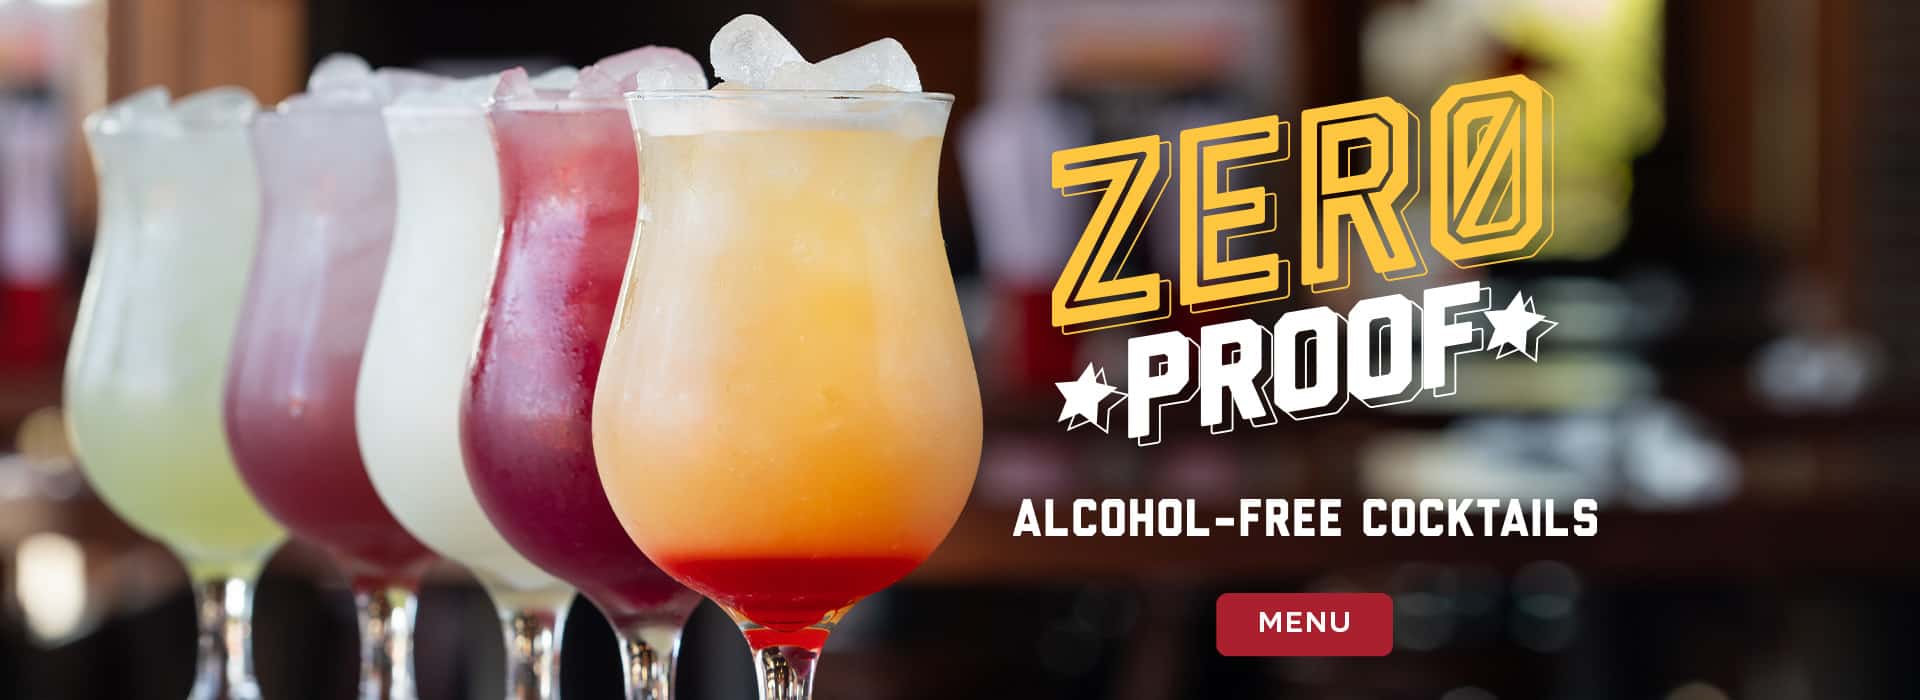 Zero Proof - Alcohol-Free Cocktails. Click or tap here to view!